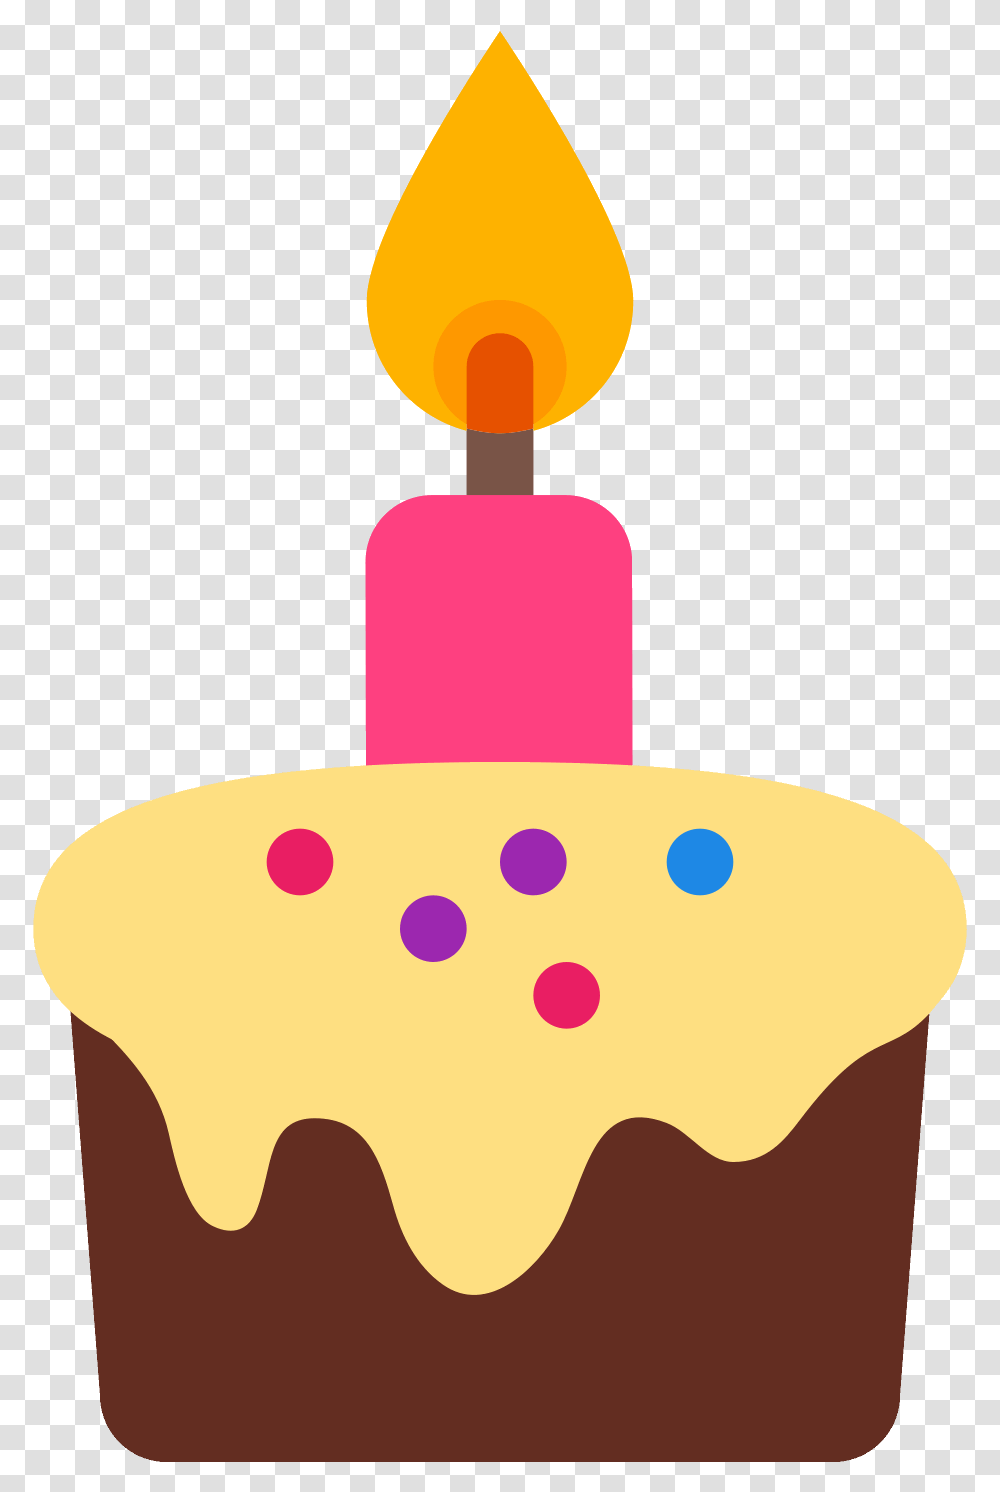 Cute Cake Icon Birthday Cake Pdf, Dessert, Food, Candle, Sweets Transparent Png